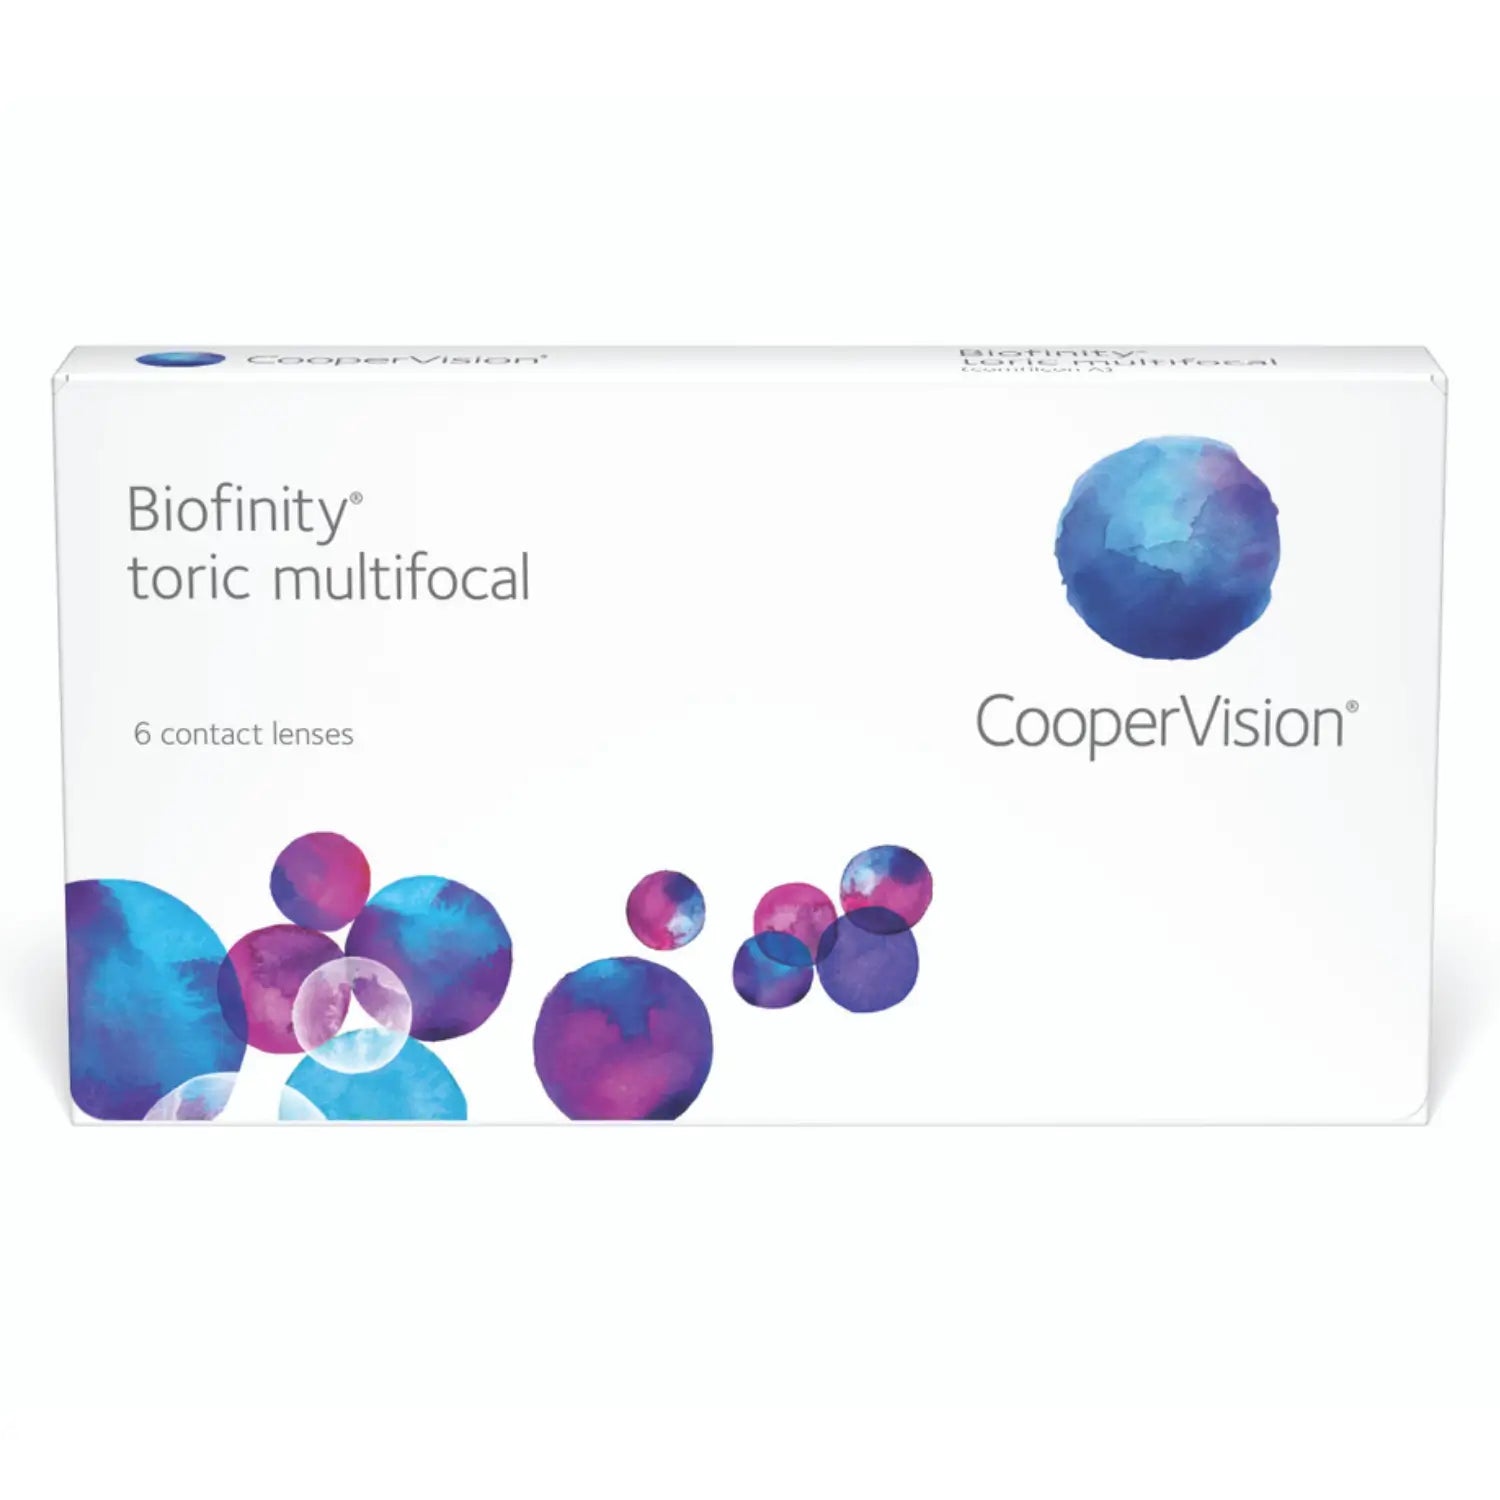 Certified Biofinity toric multifocal monthly Contact Lenses by Cooper Vision on sale online at The Optical Co at the best prices